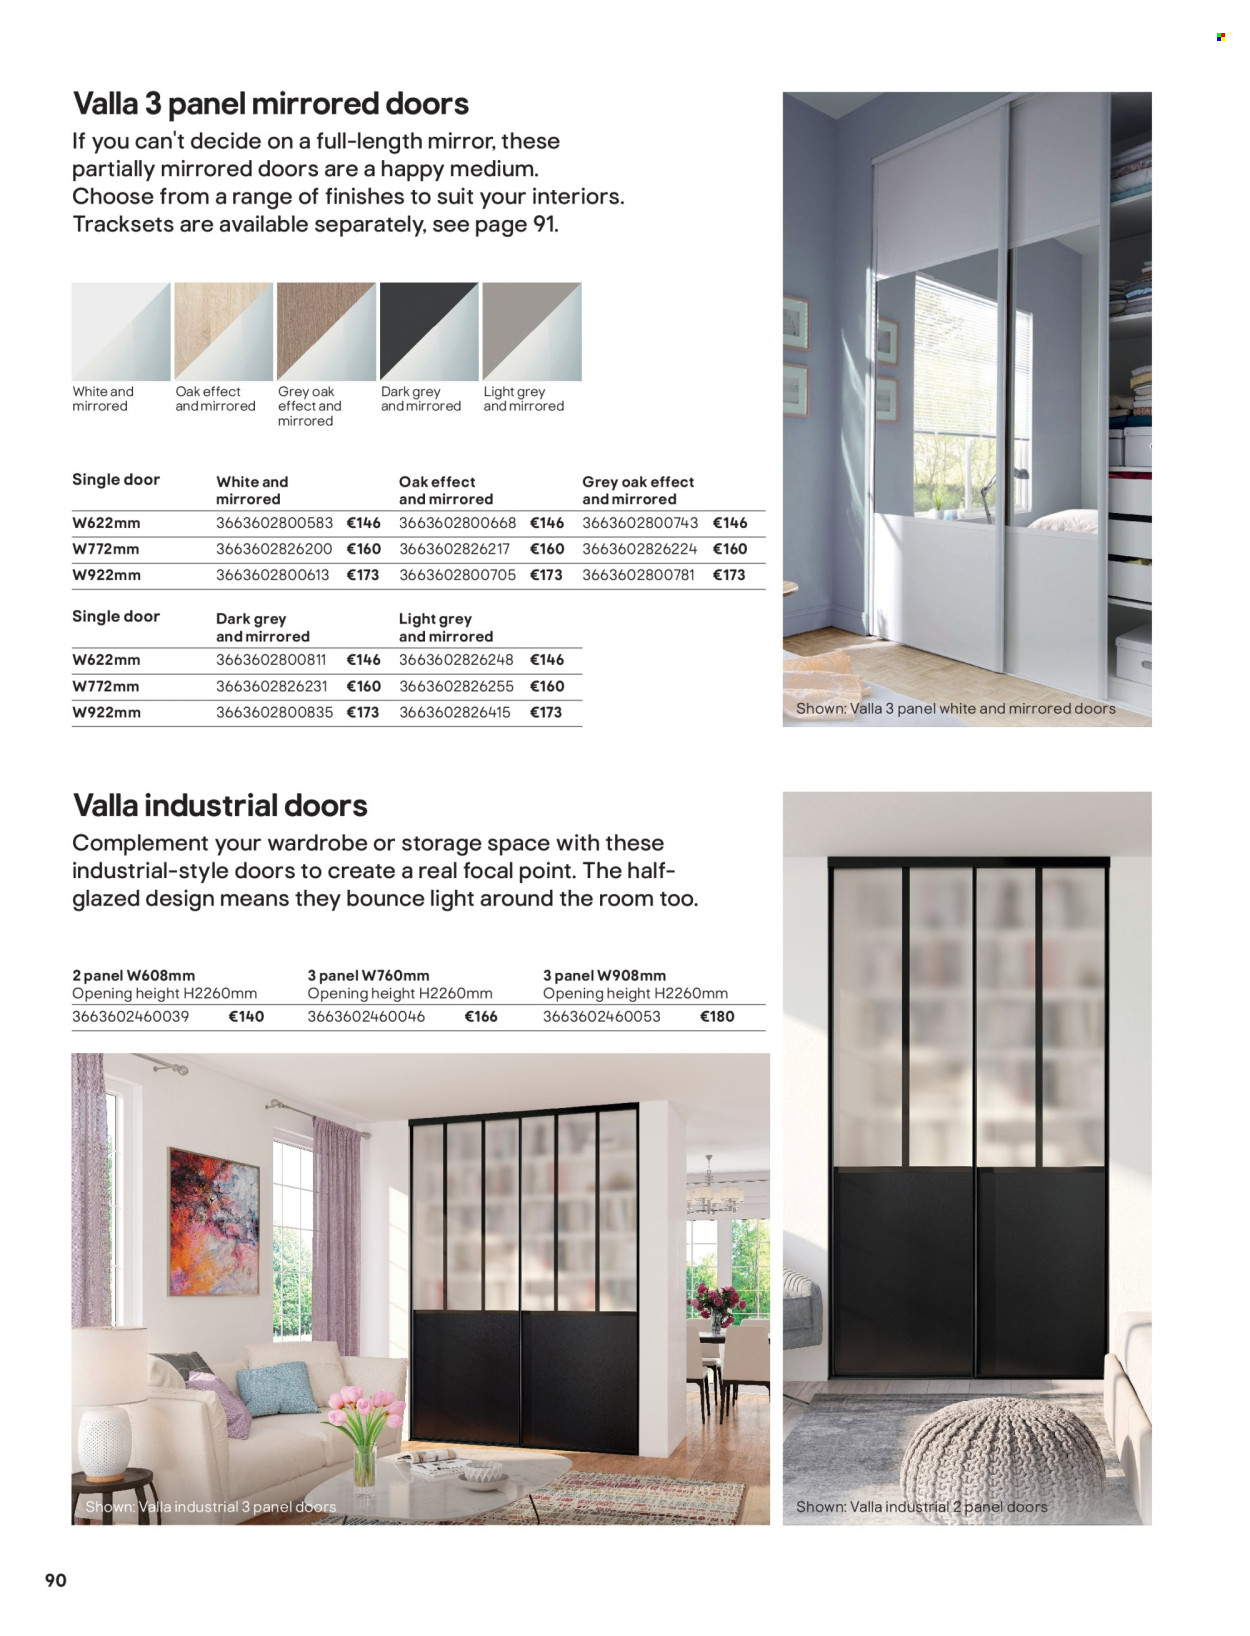 B&Q offer  - Sales products - wardrobe, mirror. Page 90.